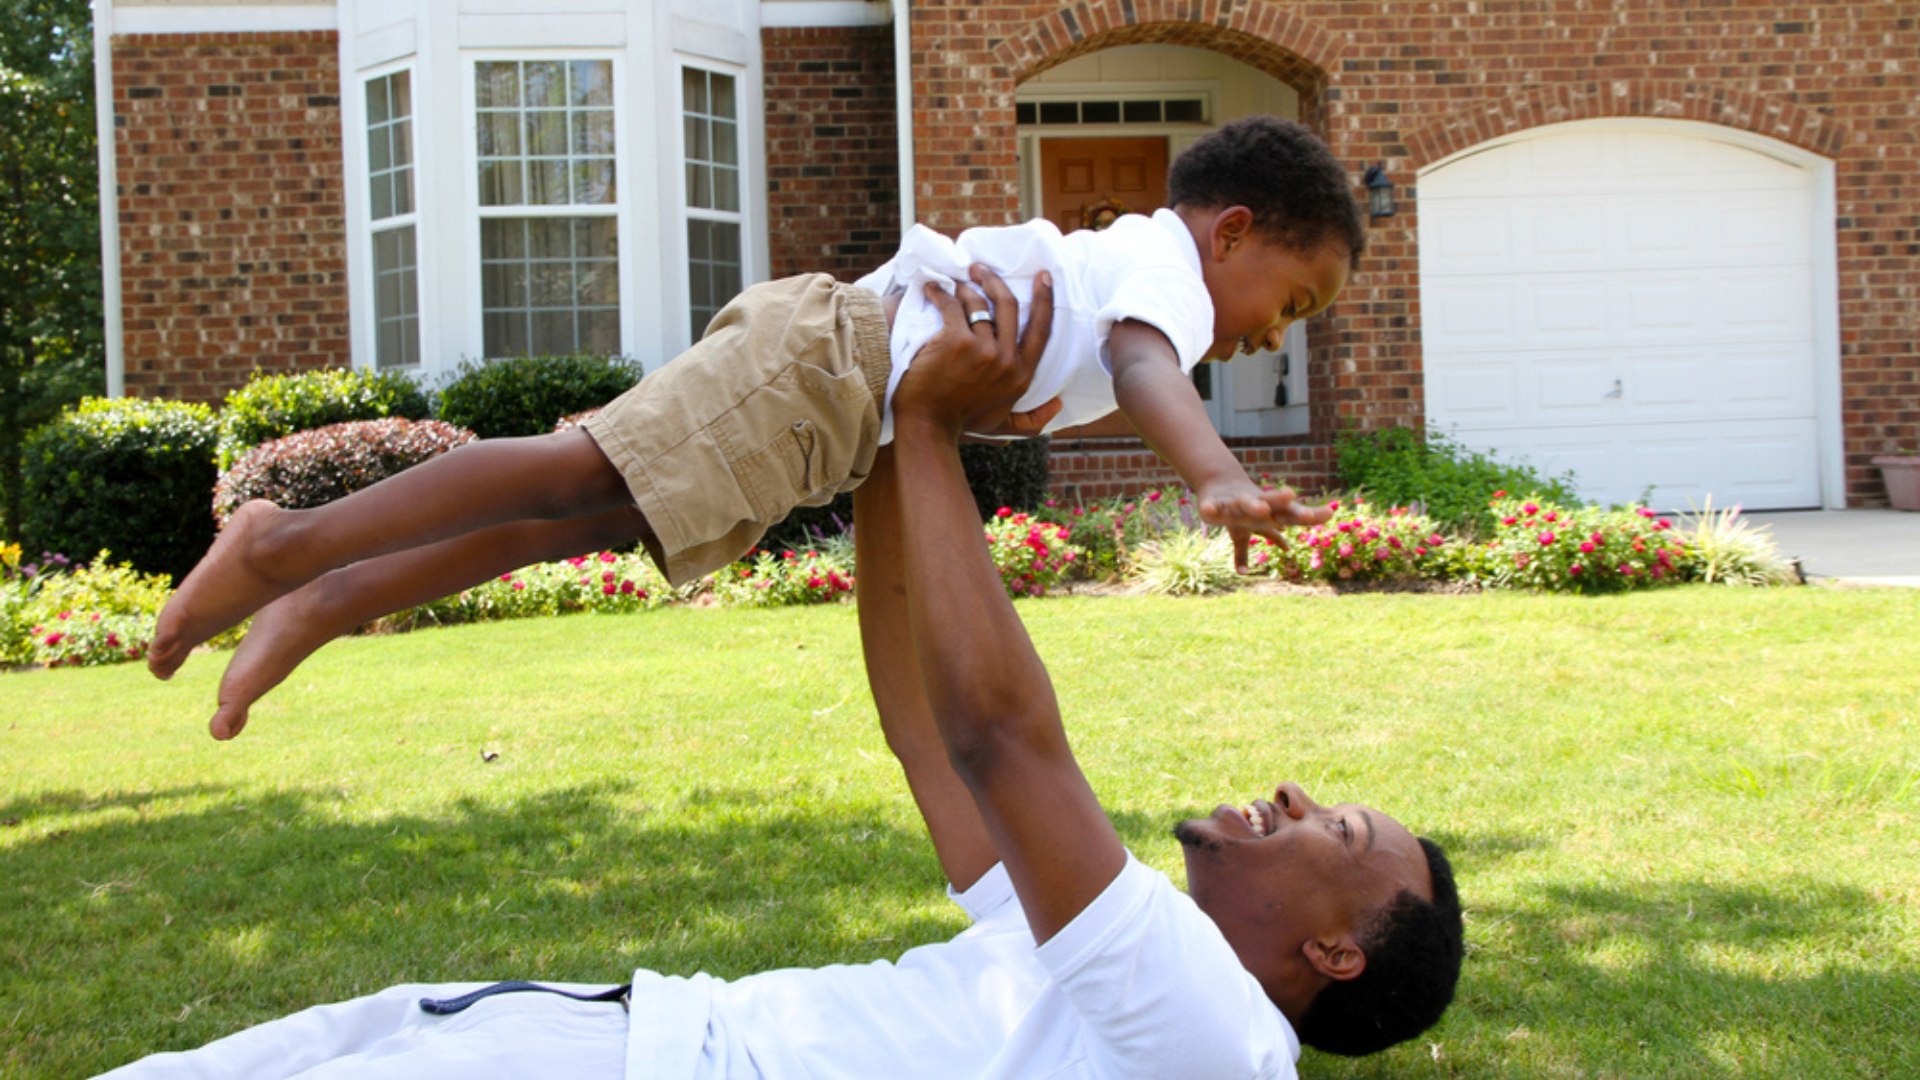 Dad lifting child while laying on grass in front of a brick home